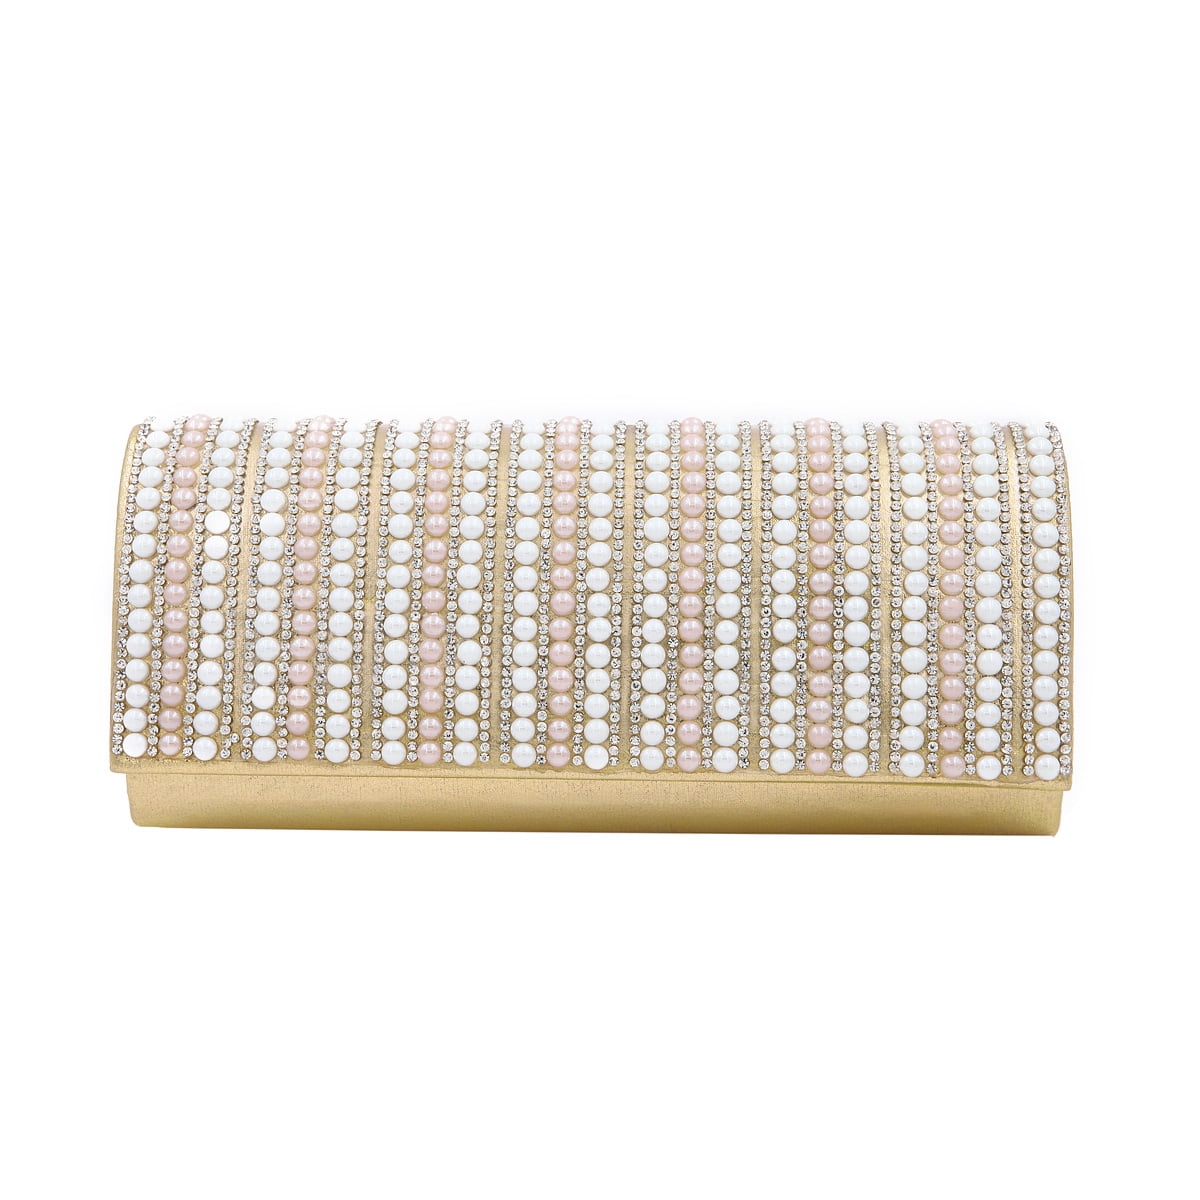 Diff Colors Rhinestones & Pearl Beads Front Glitter Shine Clutch Evening Bag 